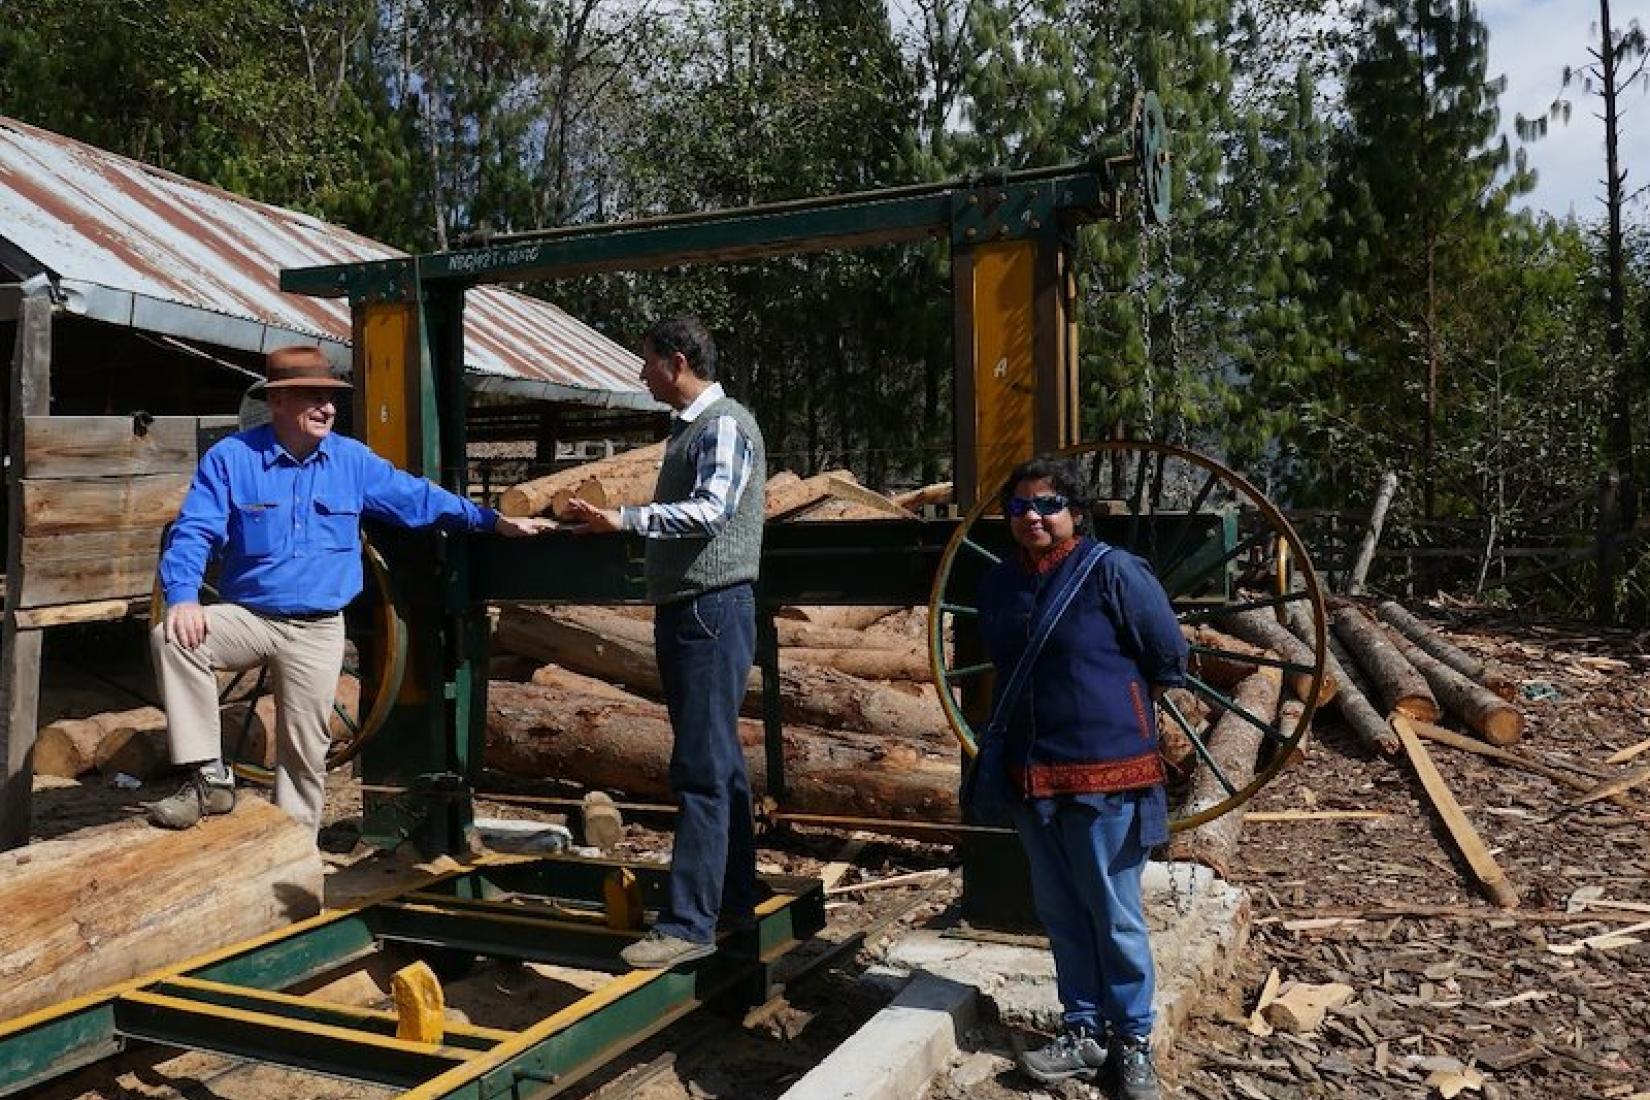 the Chaubas-Bhumlu community sawmill that was first established with the support of the Nepal-Australia Community Forestry Project and has been re-opened under the ACIAR-funded EnLiFT project.